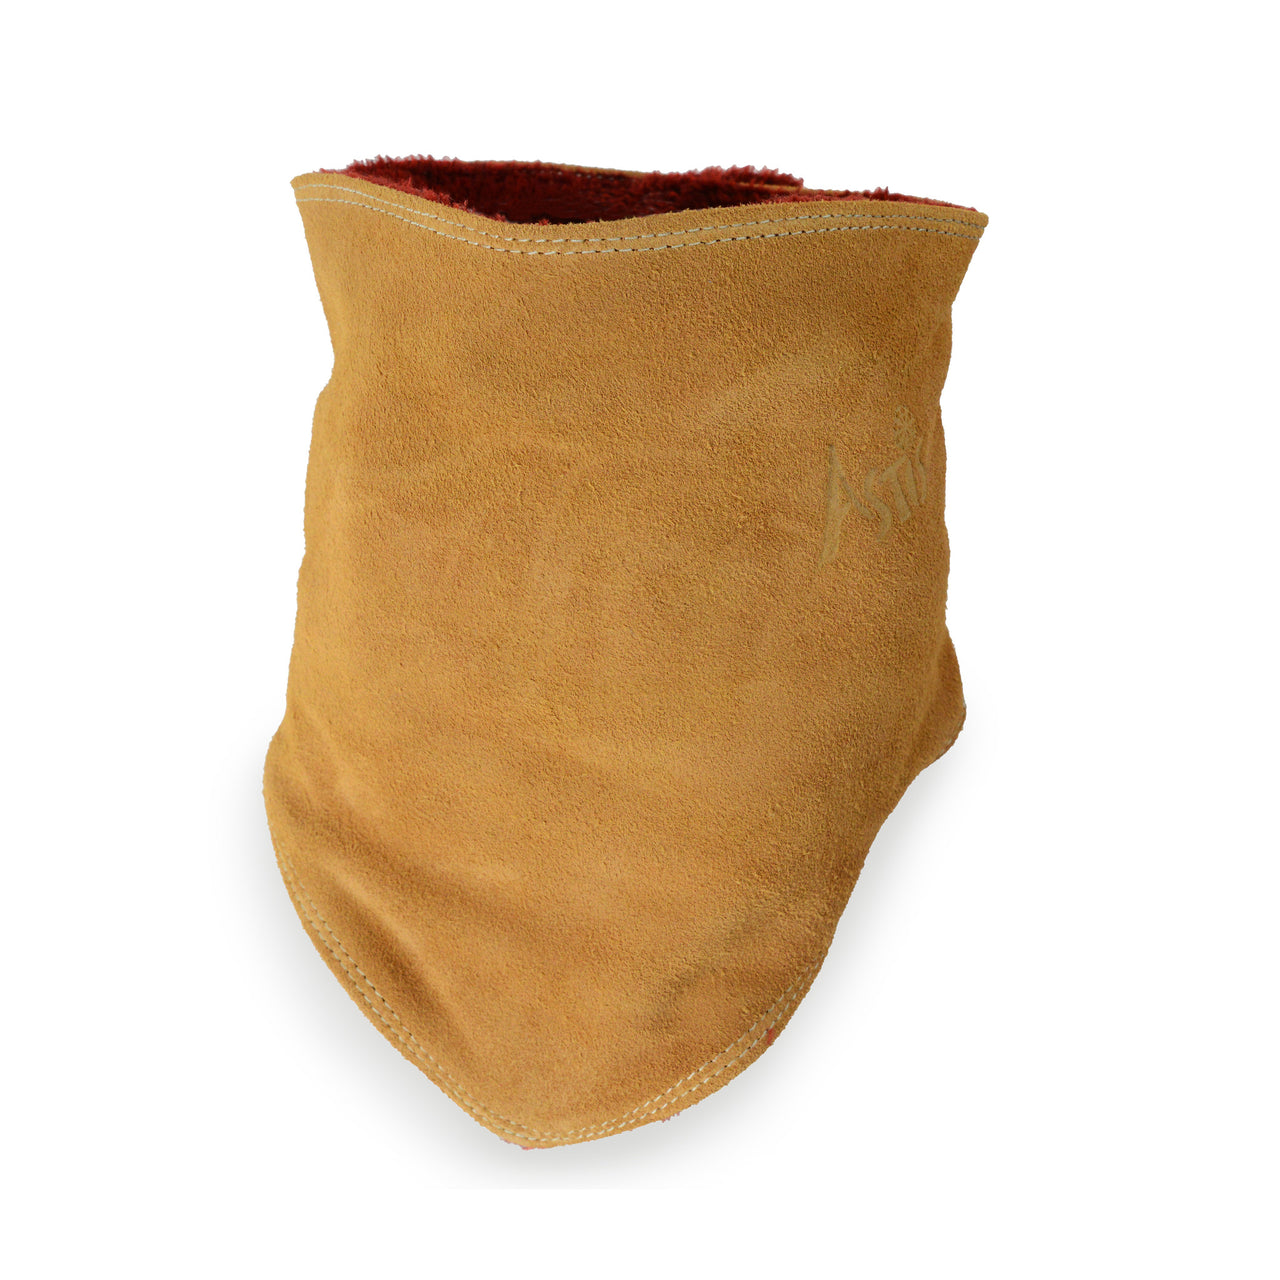 Leather Facemask - Brown